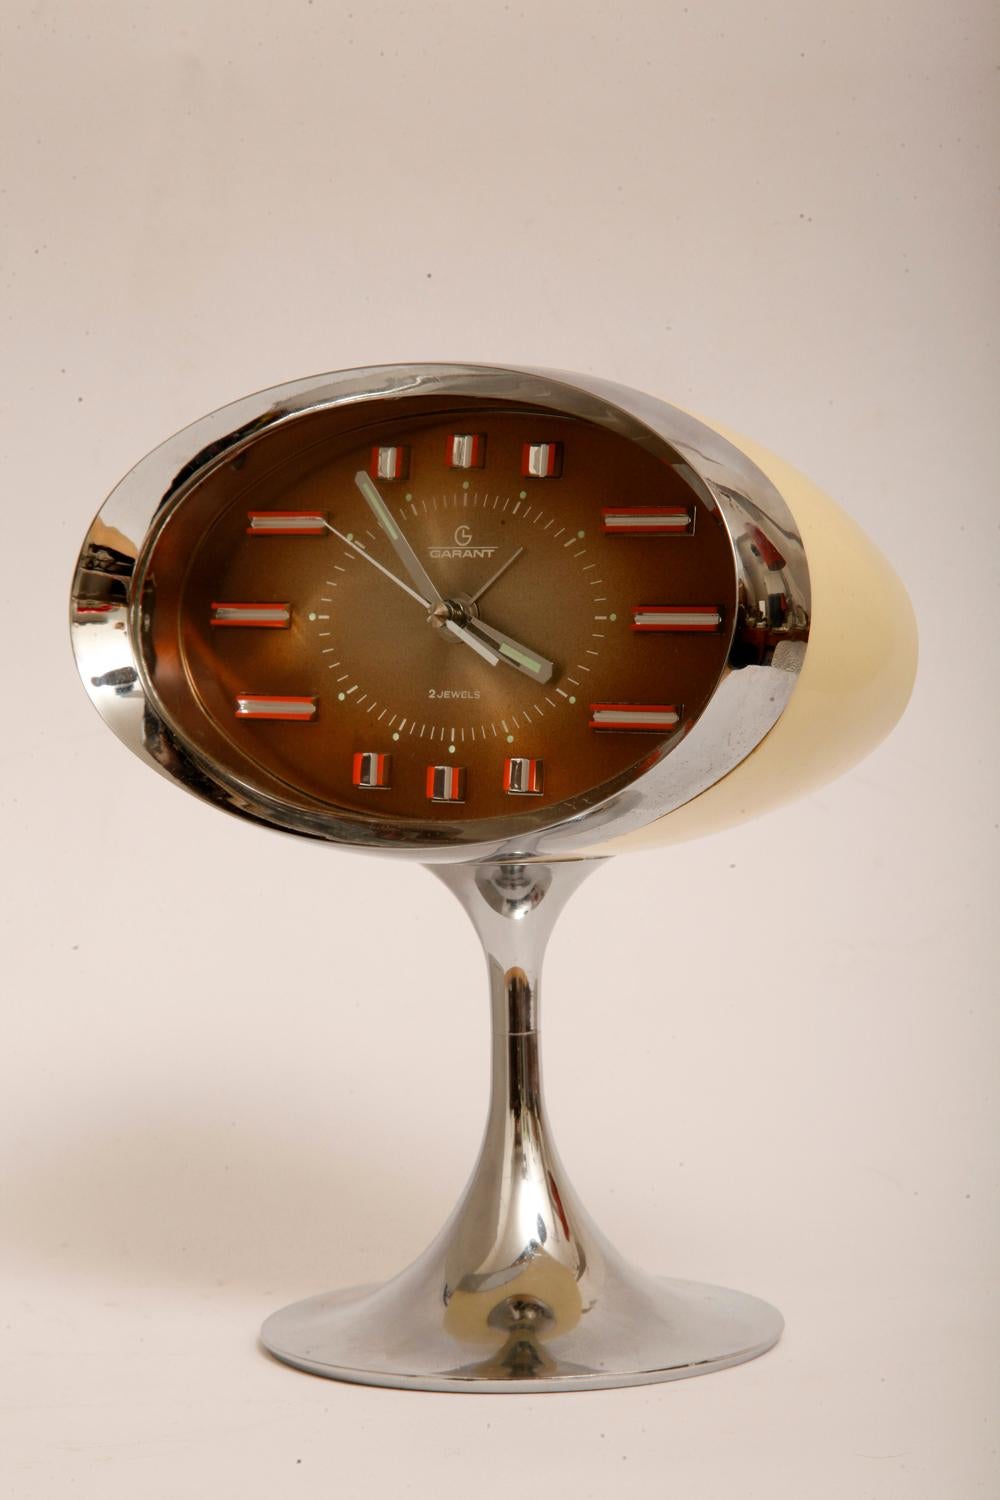 Japanese Space Age Alarm Clock Garant, Plastic and Chromed, 1970s For Sale 9